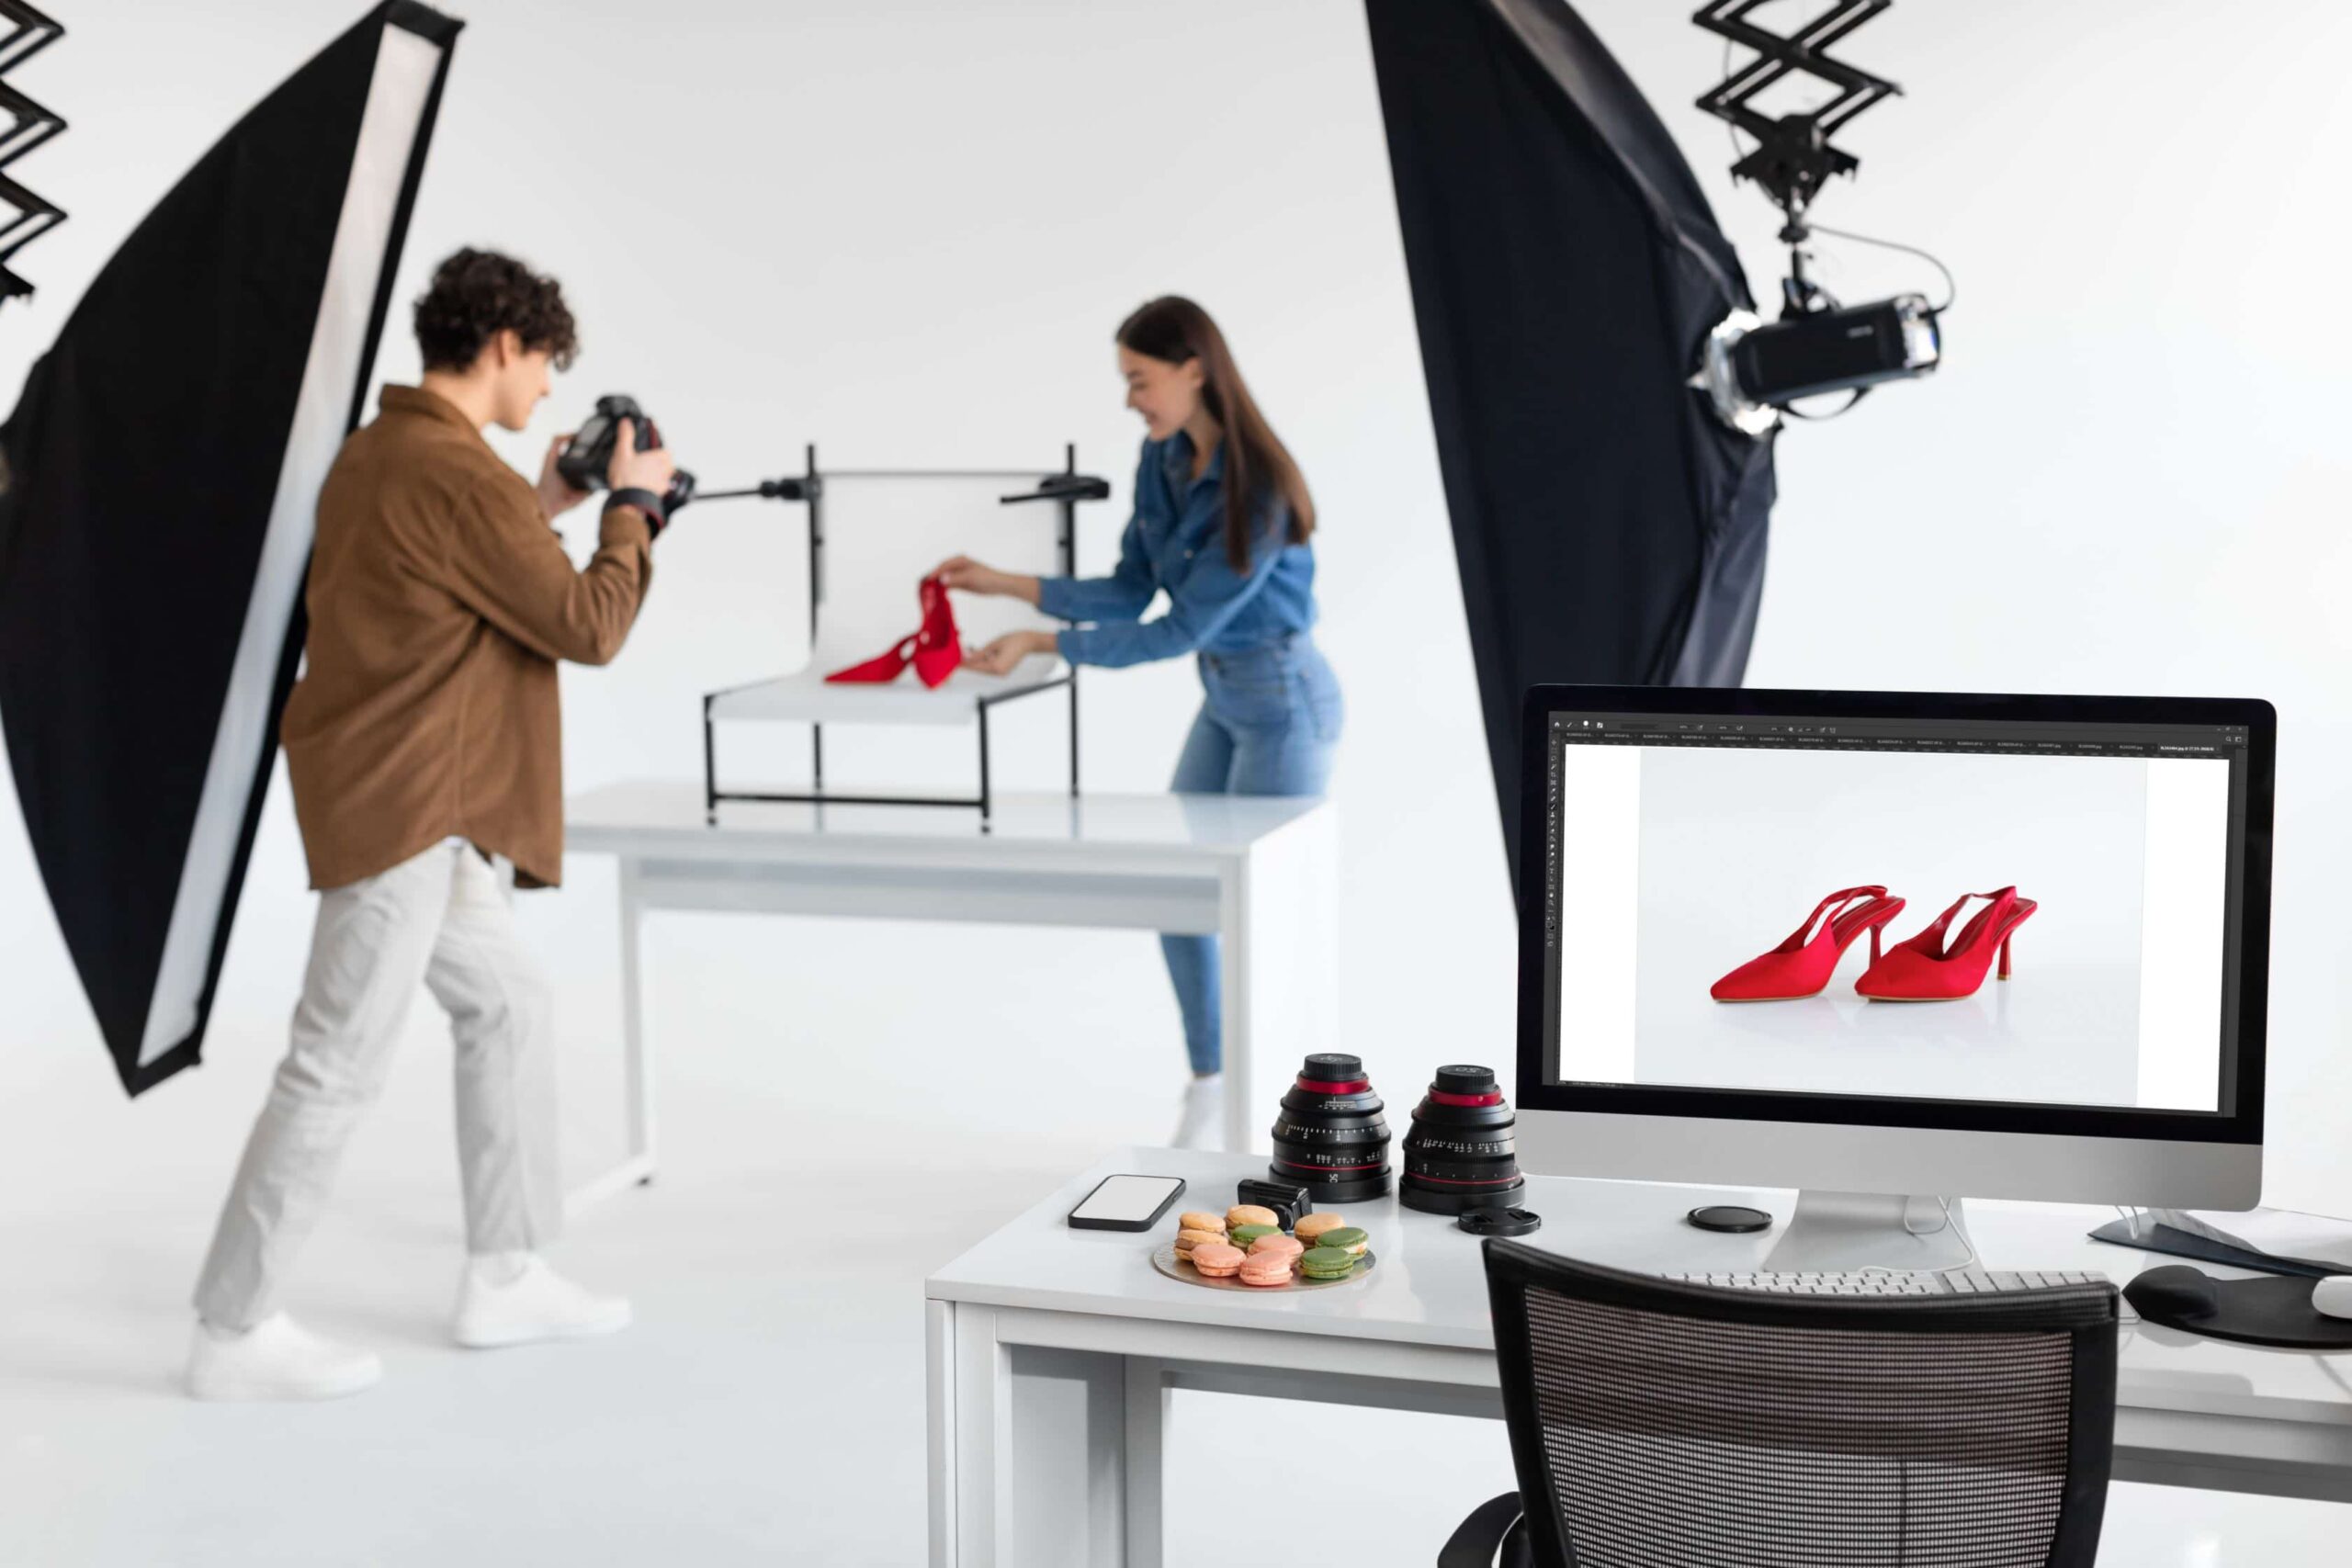 Two models are showing product photography ideas, capturing a pair of red shoe. The picture is showing a desktop computer displaying the red shoe, two camera lens, and a plate of biscuits on the table. The picture also includes two lighting setup and a chair in front of the table.